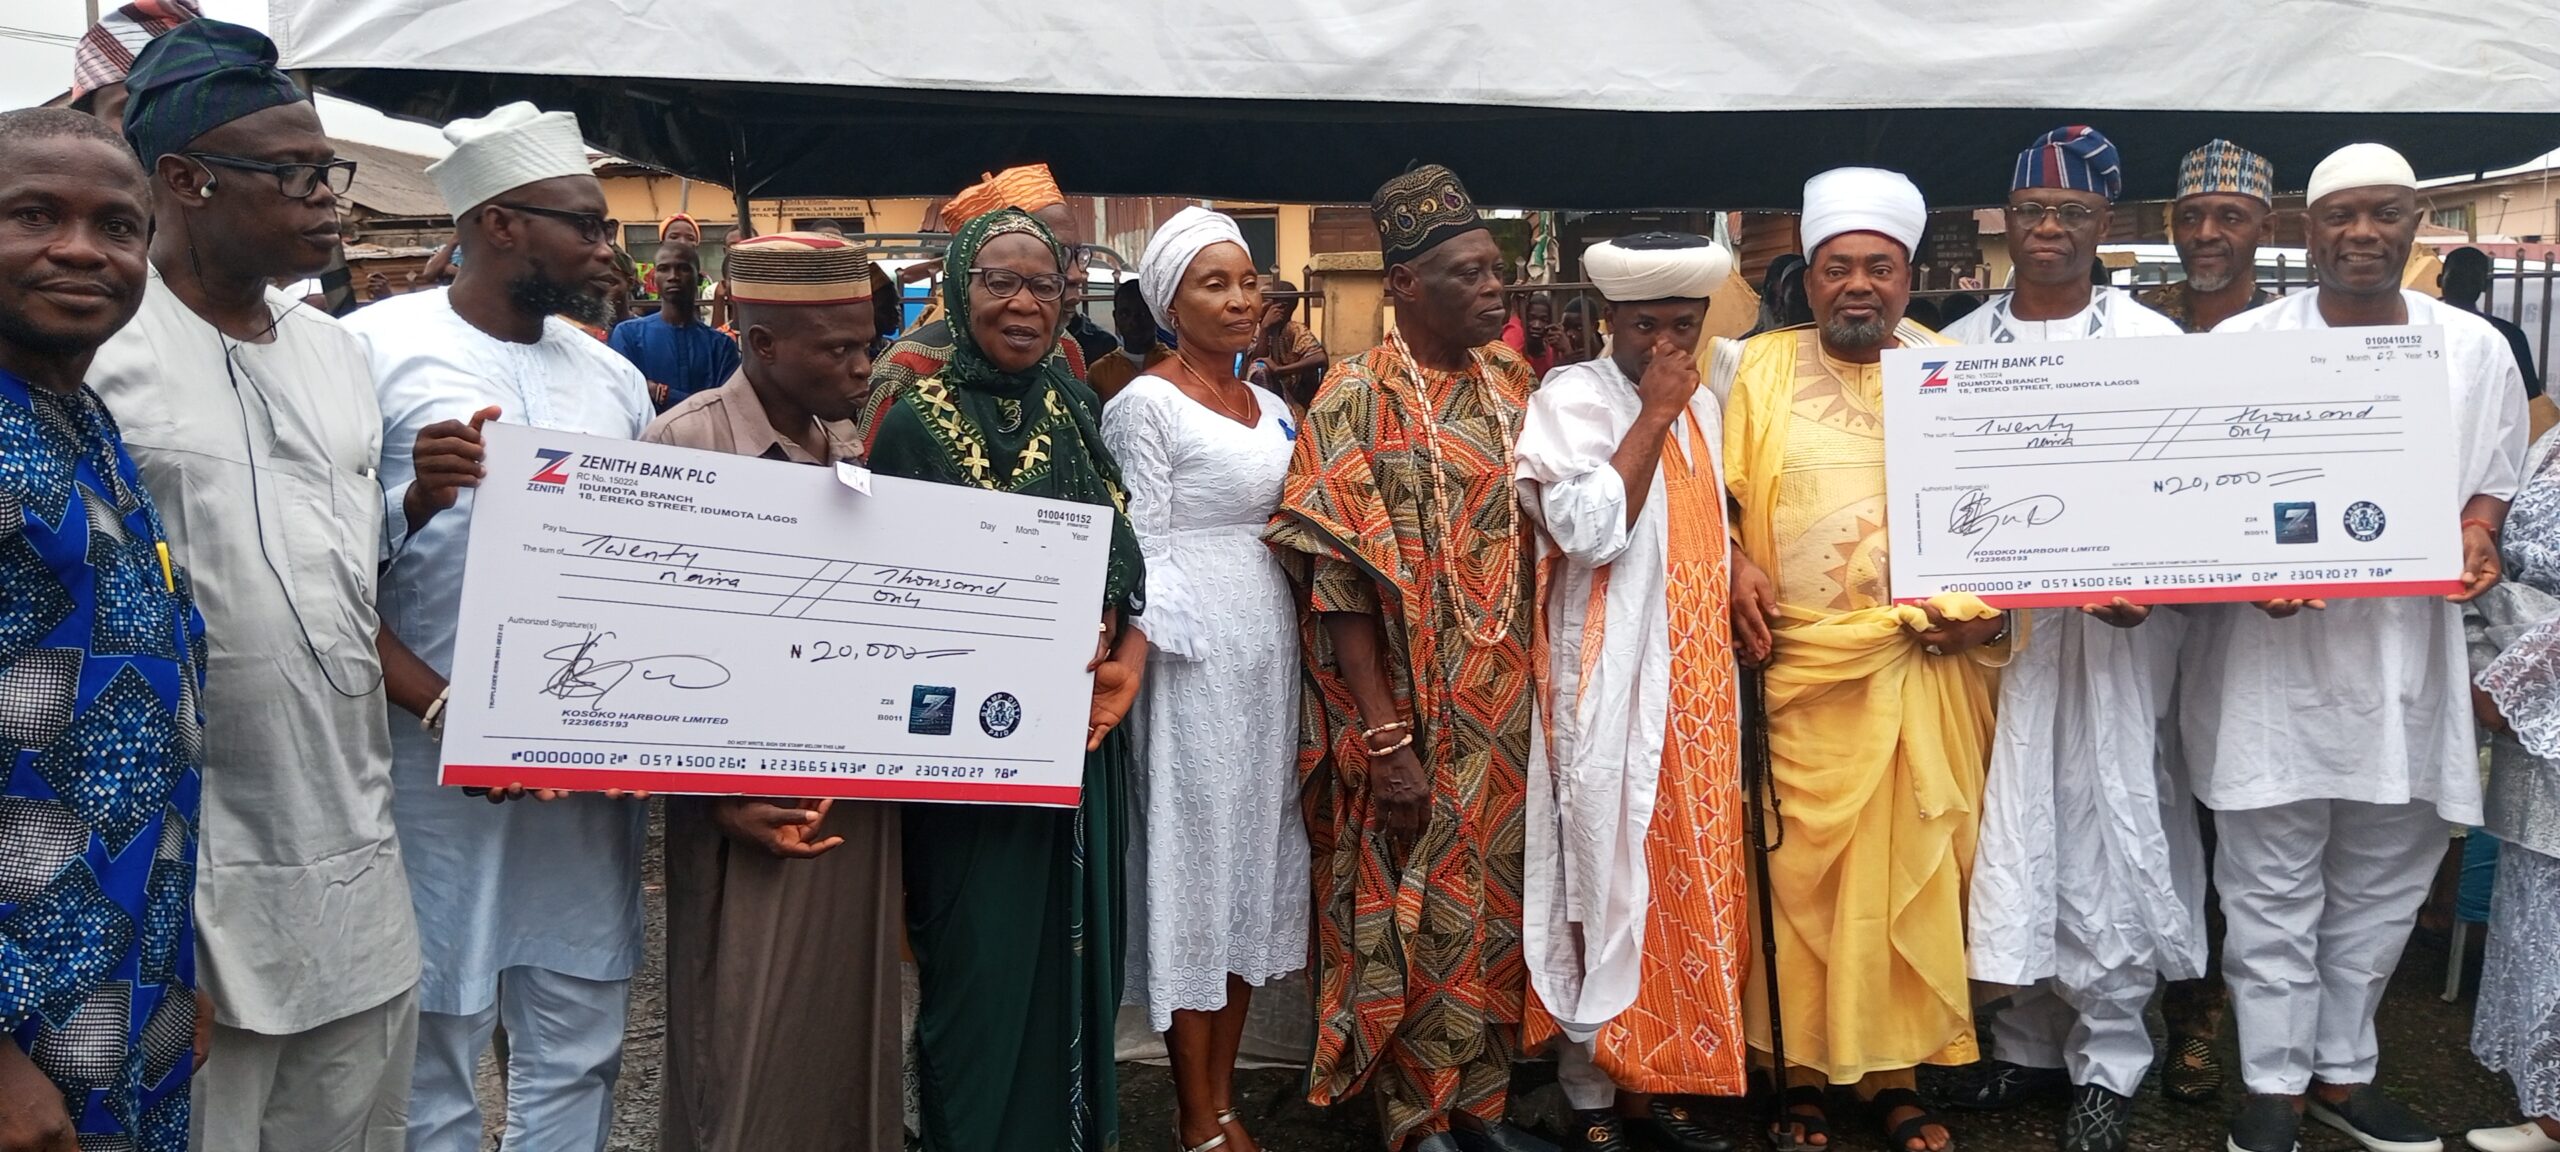 Epe Kayokayo Festival Celebrated with Religious Fervor and Cultural Splendor at Prestigious 1st Epe Central Mosque